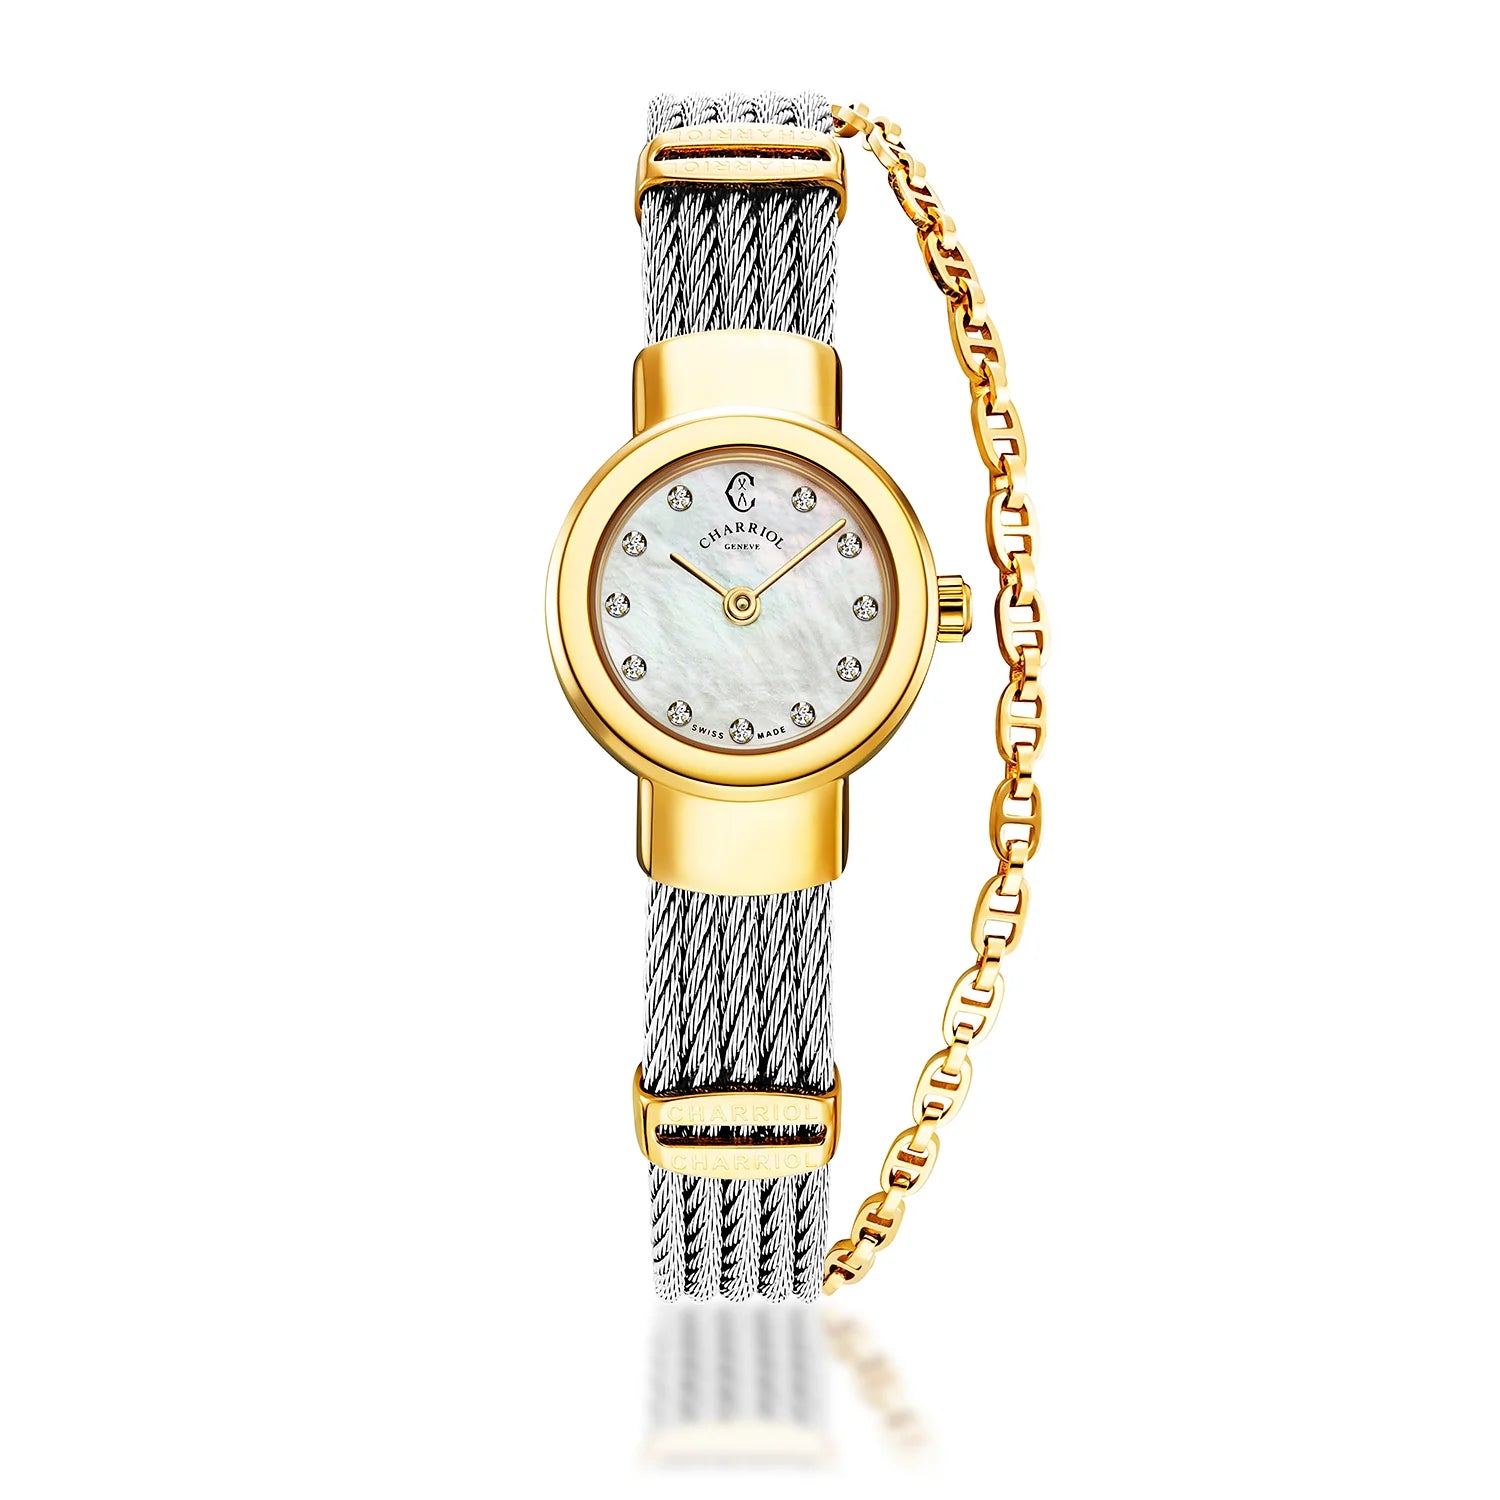 ST TROPEZ, 20MM, QUARTZ CALIBRE, WHITE MOTHER-OF-PEARL WITH 11 DIAMONDS DIAL, STEEL YELLOW GOLD PVD BEZEL, STEEL CABLE BRACELET - Charriol Geneve -  Watch